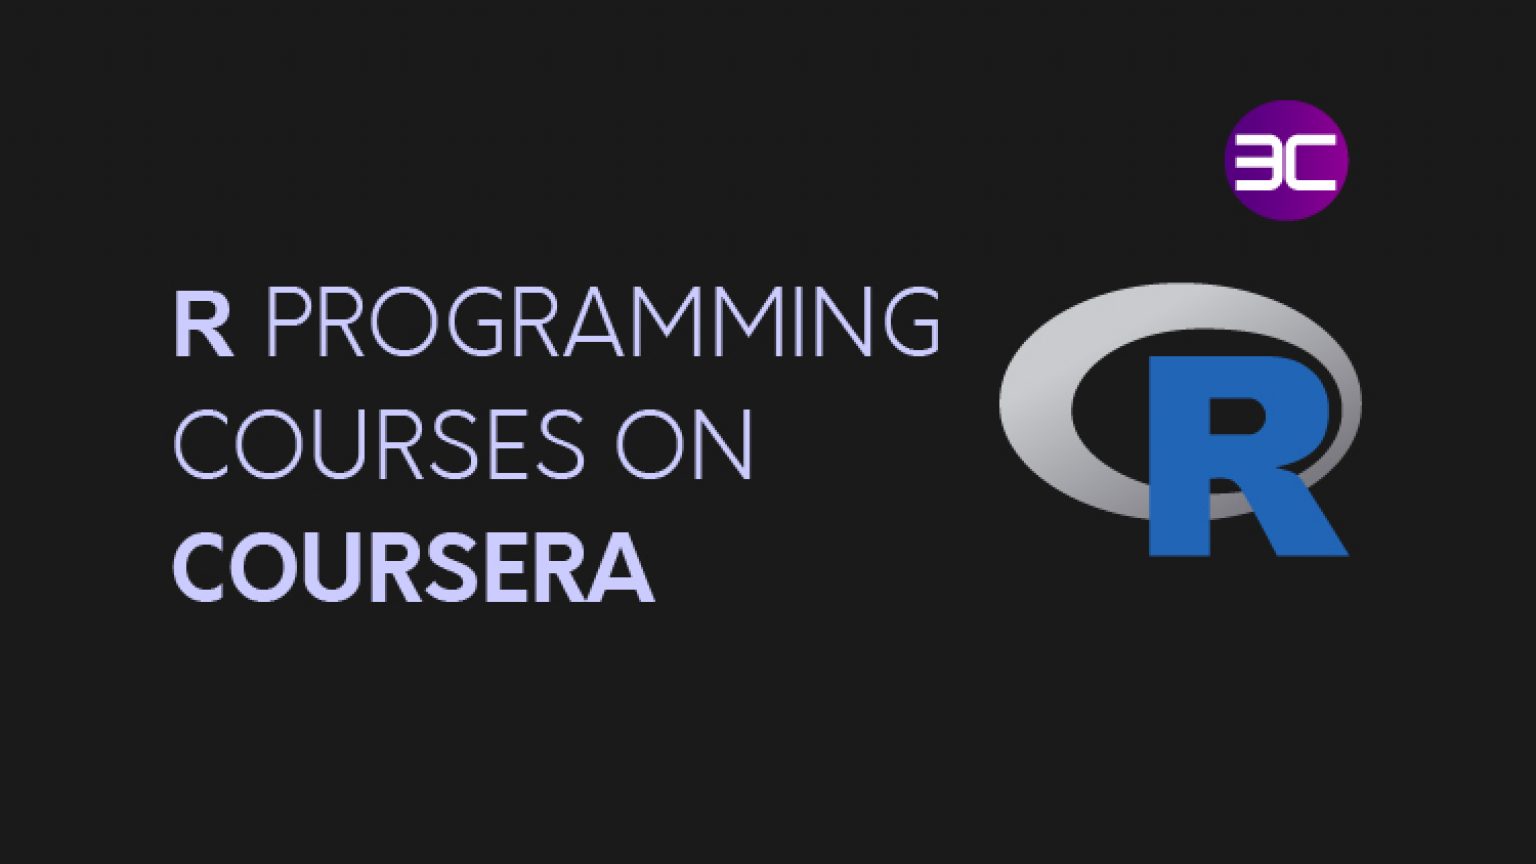 10-best-r-programming-certification-courses-on-coursera-2023-3c